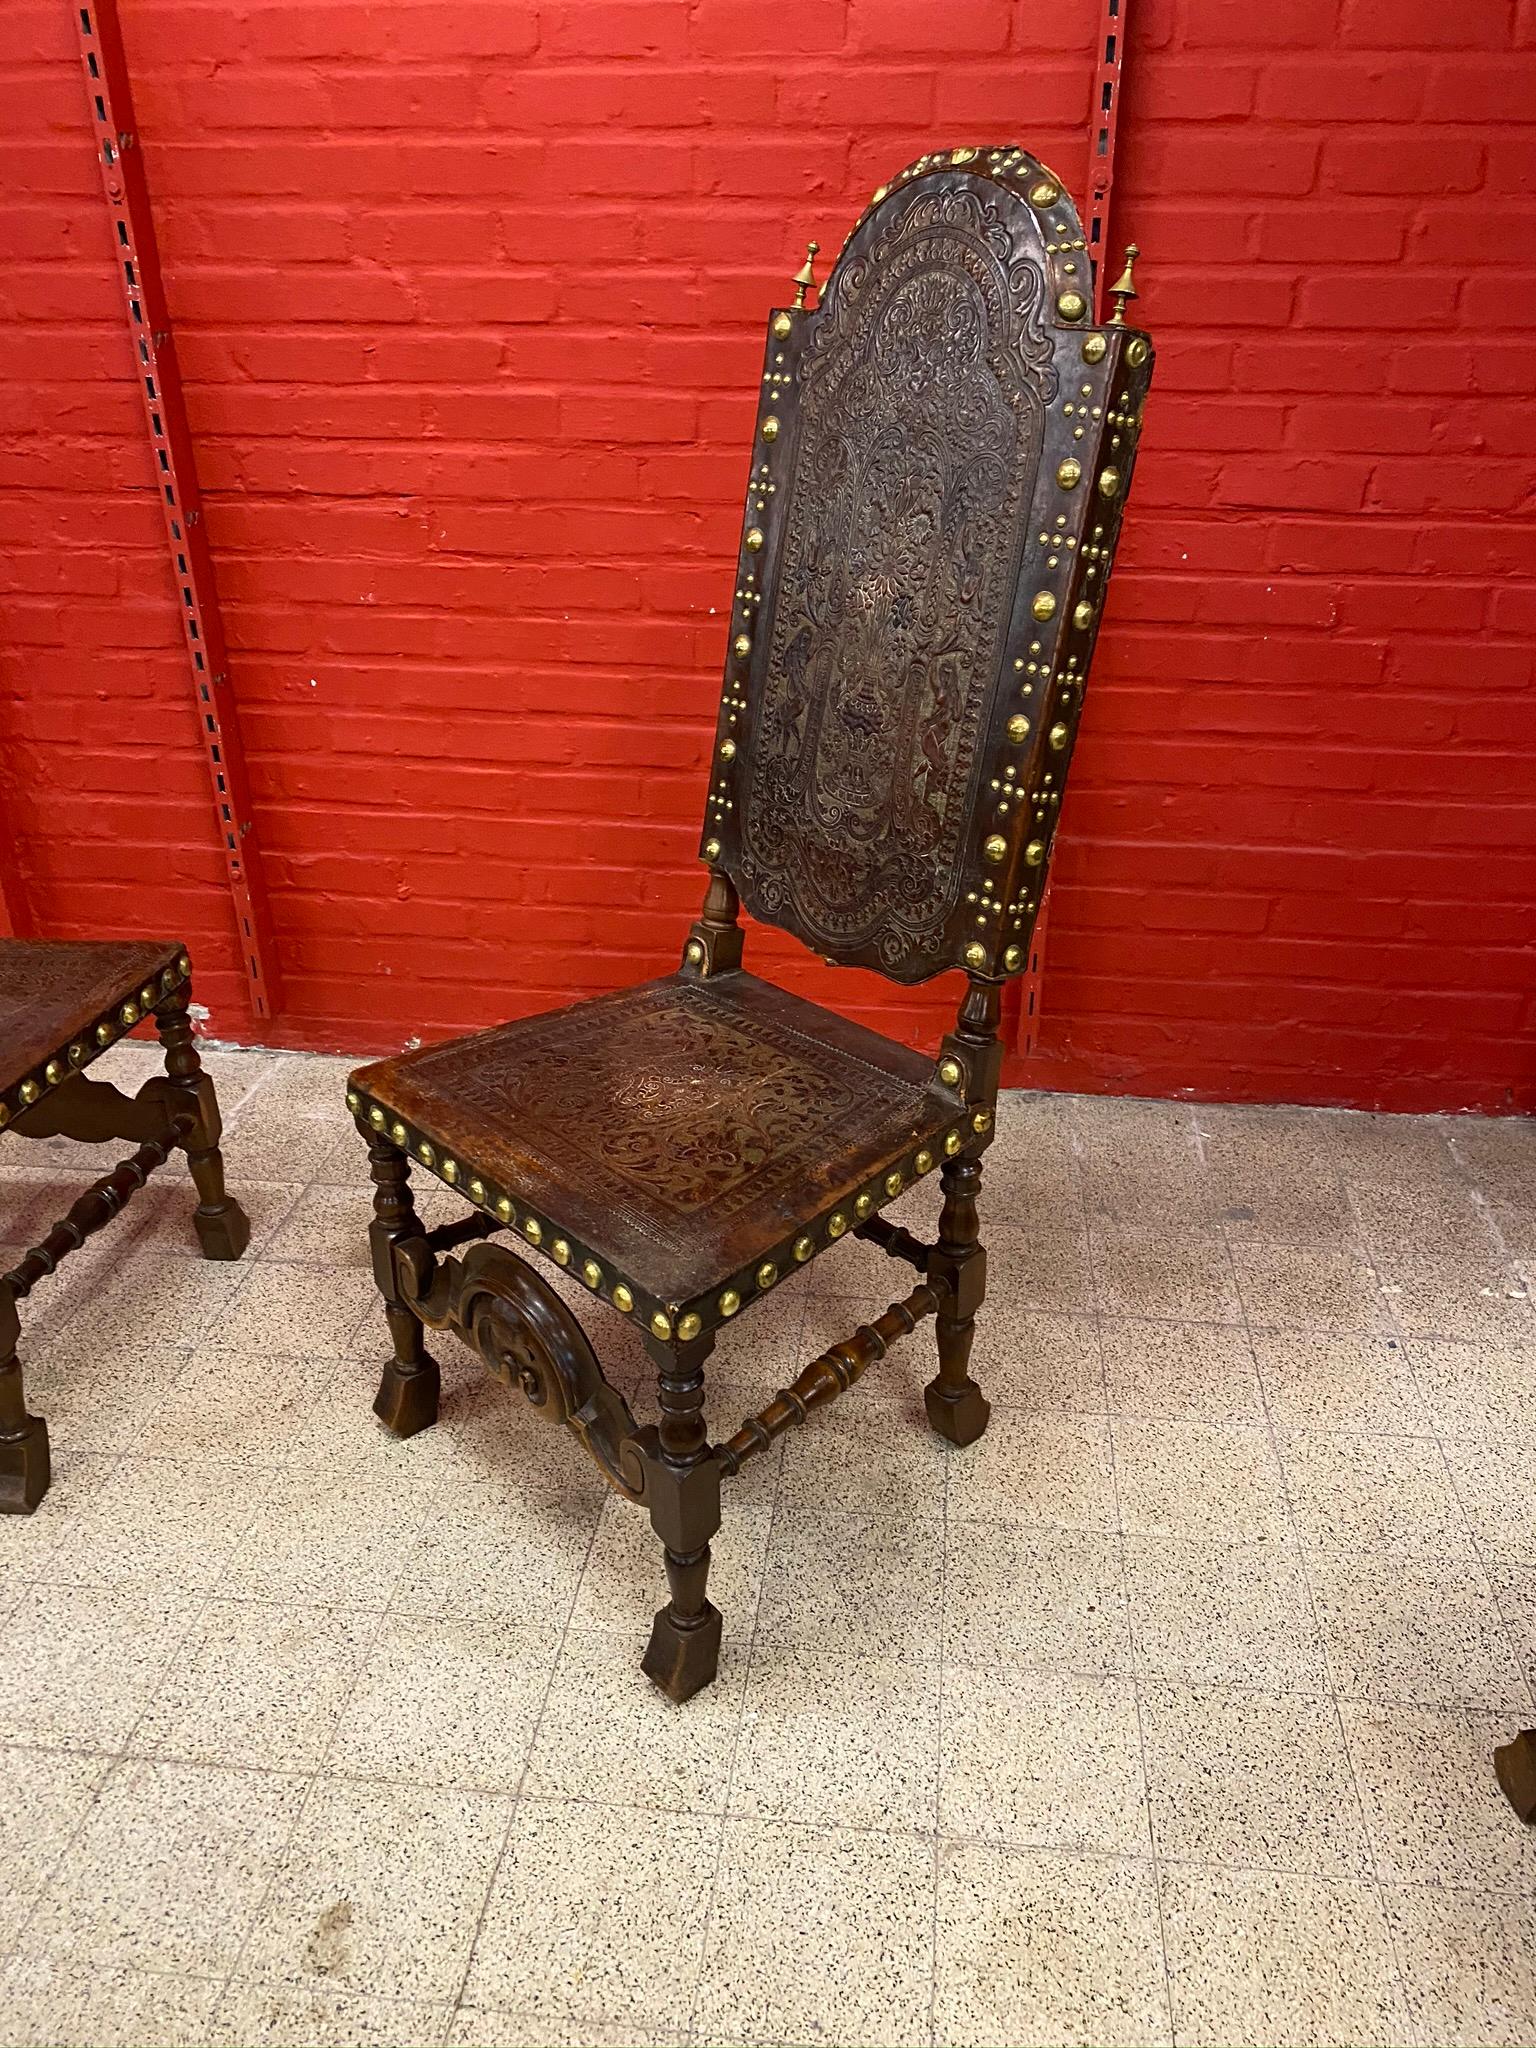 3 High-Backed Chairs, Cordoba Leather Trim with Native American Decor, Spain For Sale 9